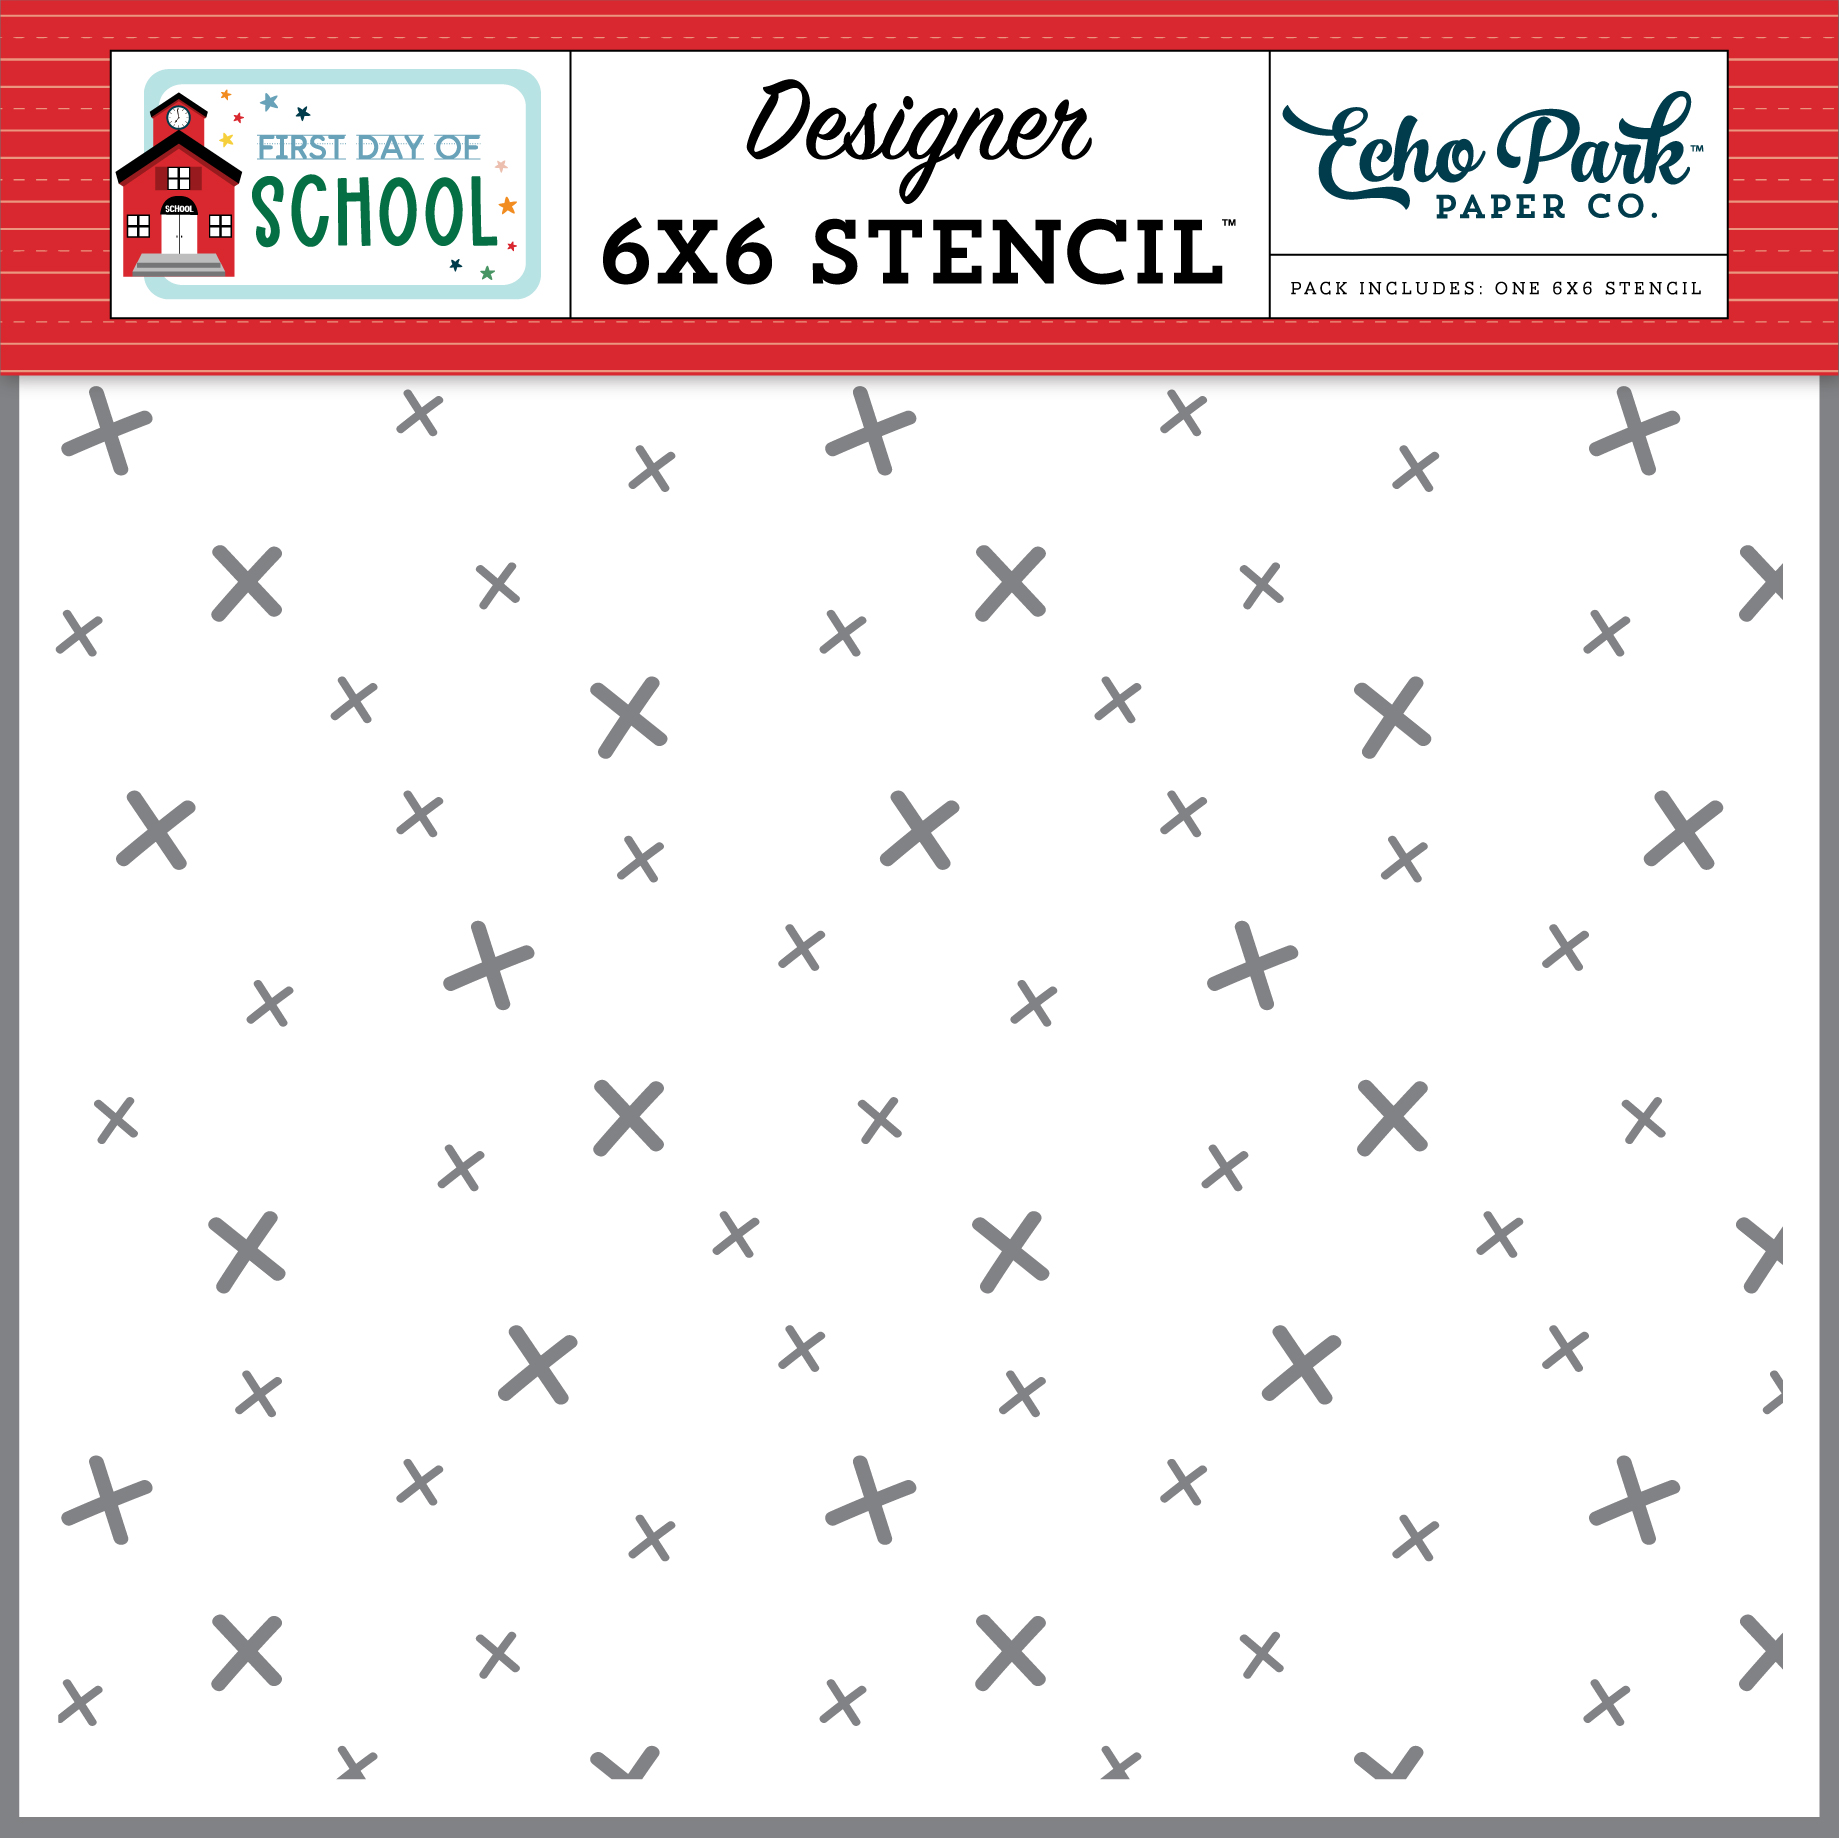 First Day Of School 6x6 Paper Pad